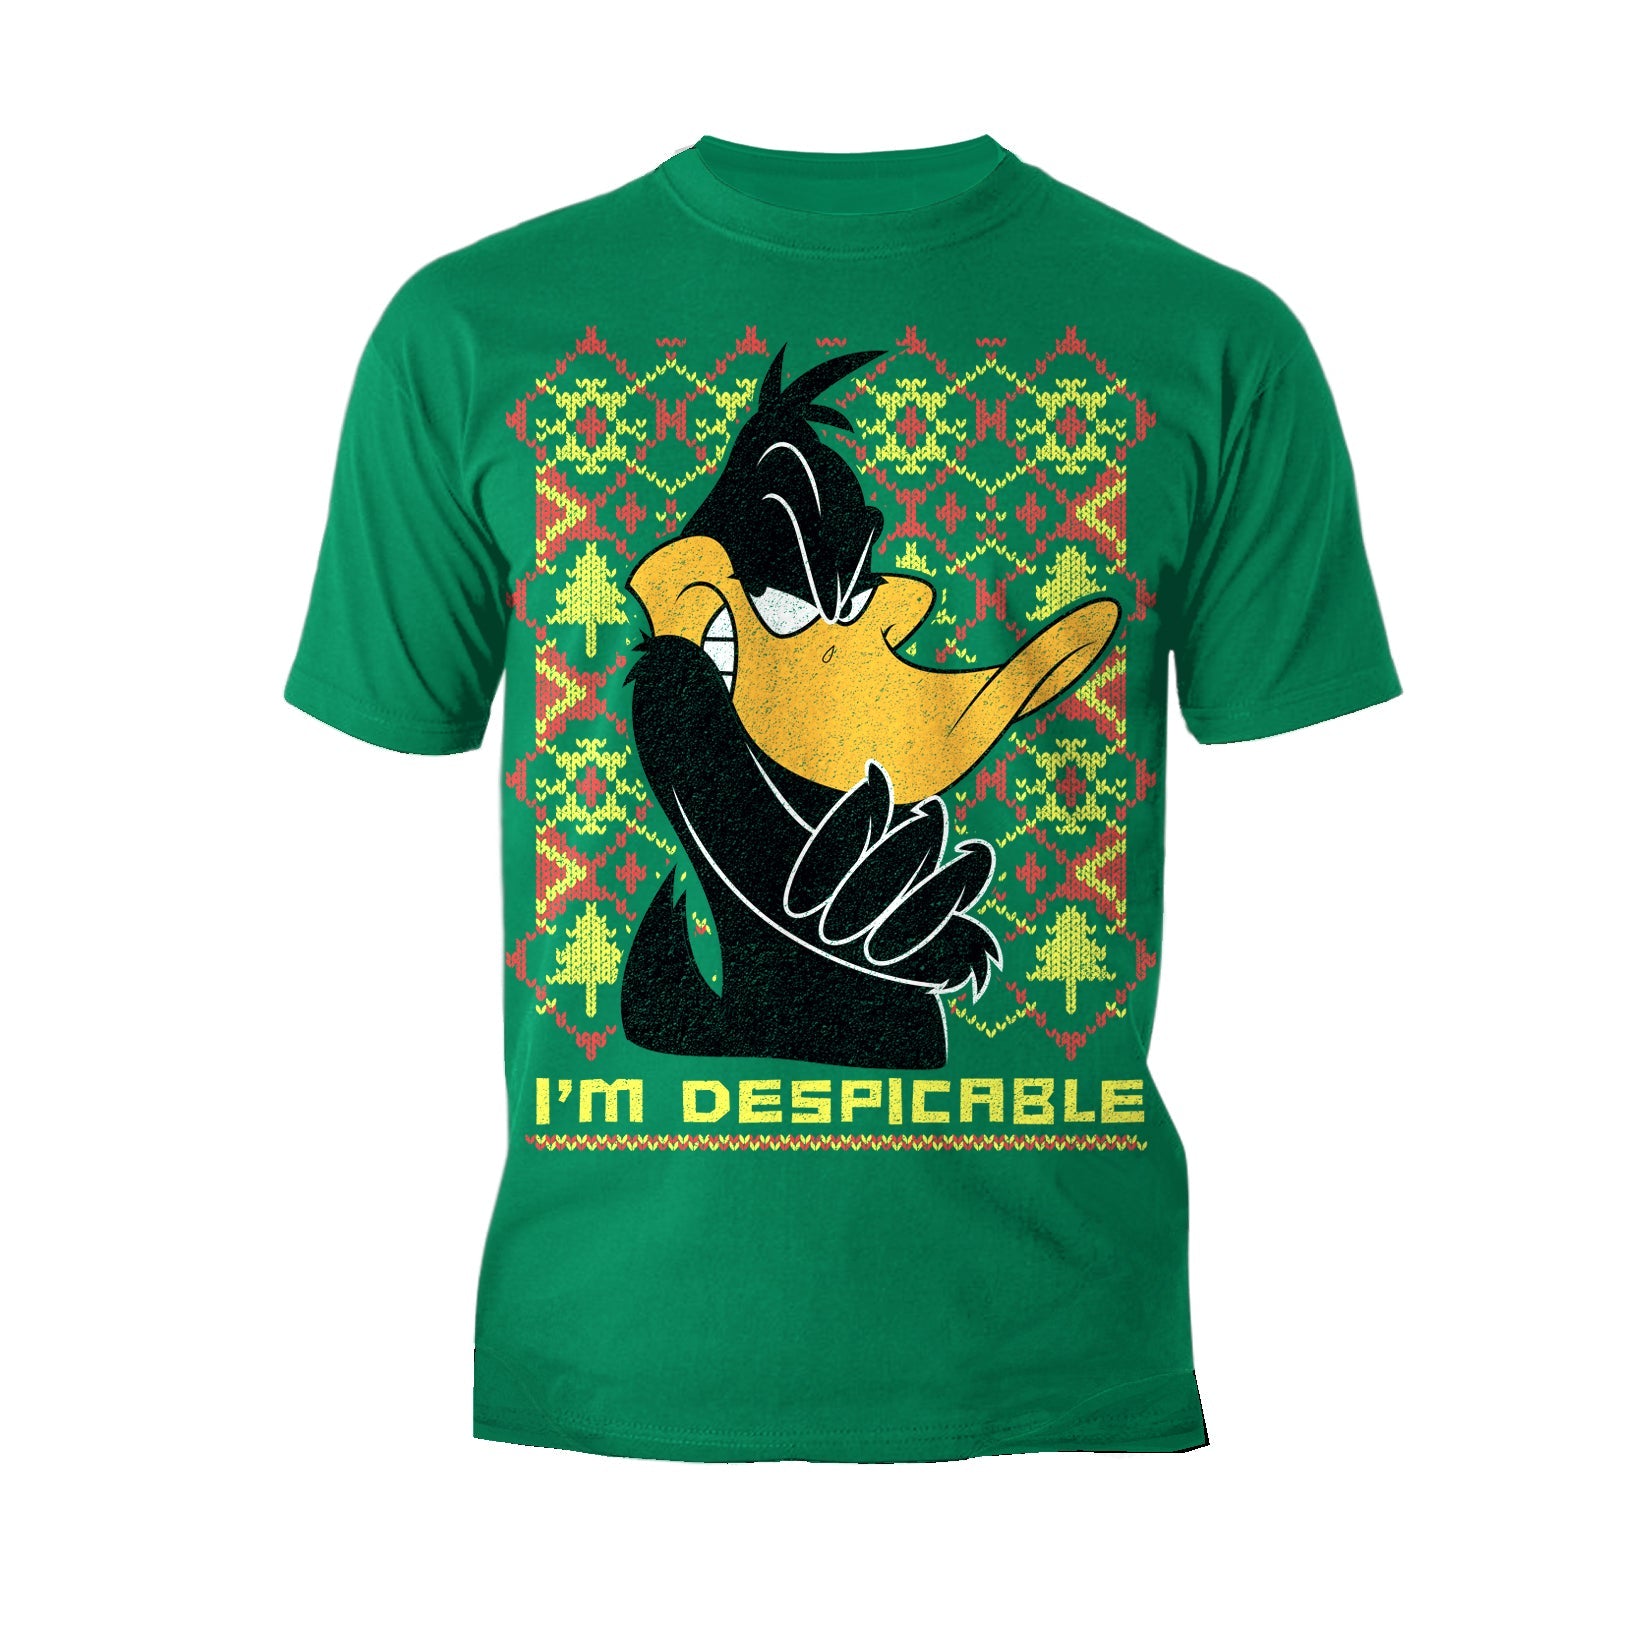 Looney Tunes Daffy Duck Xmas Despicable Official Men's T-Shirt